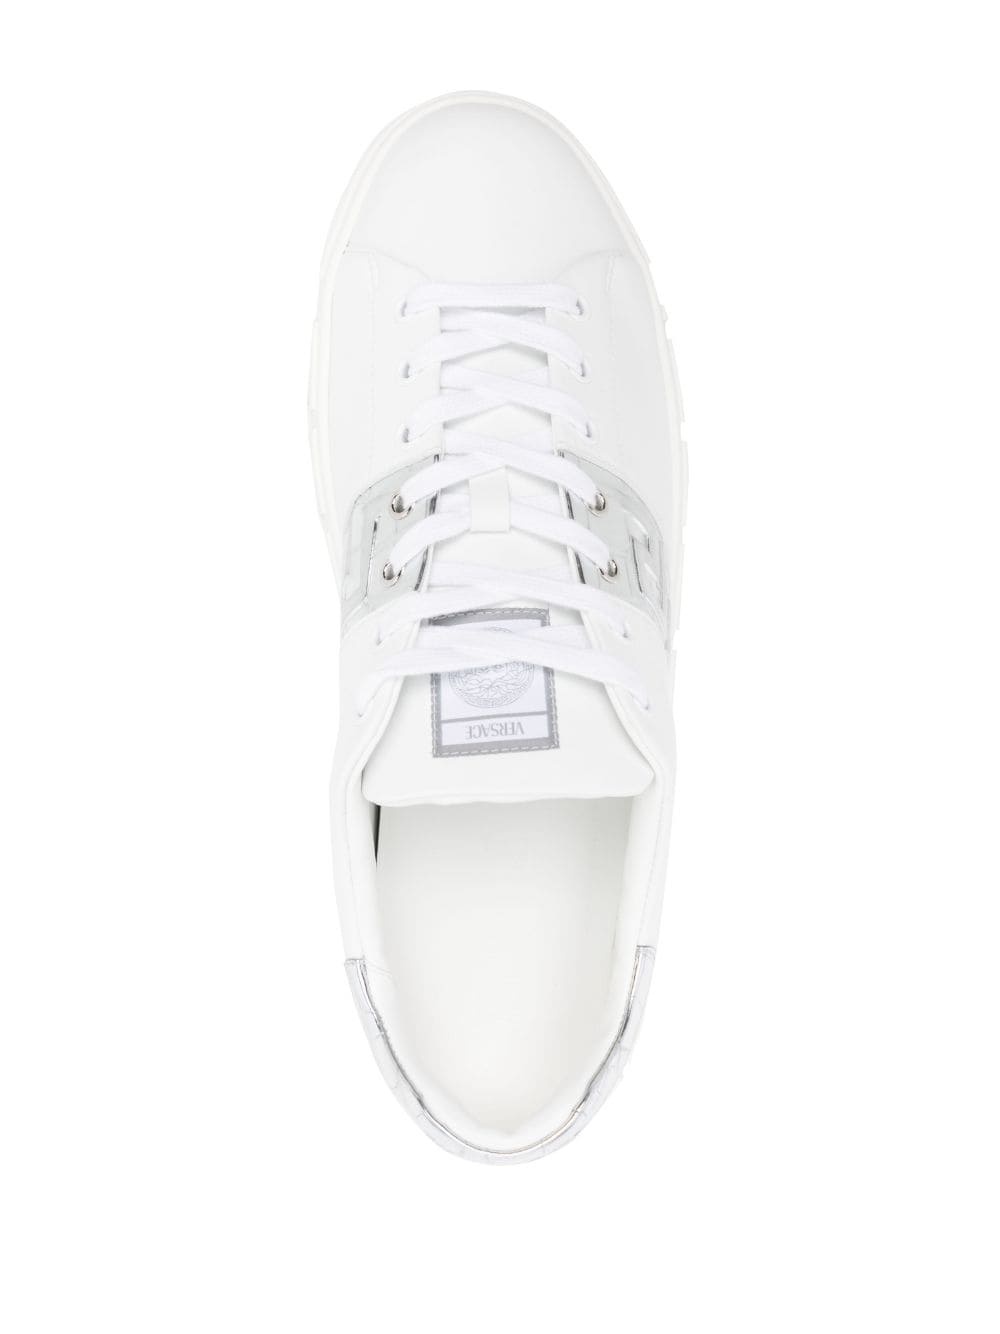 Greca-detail leather sneakers - 4